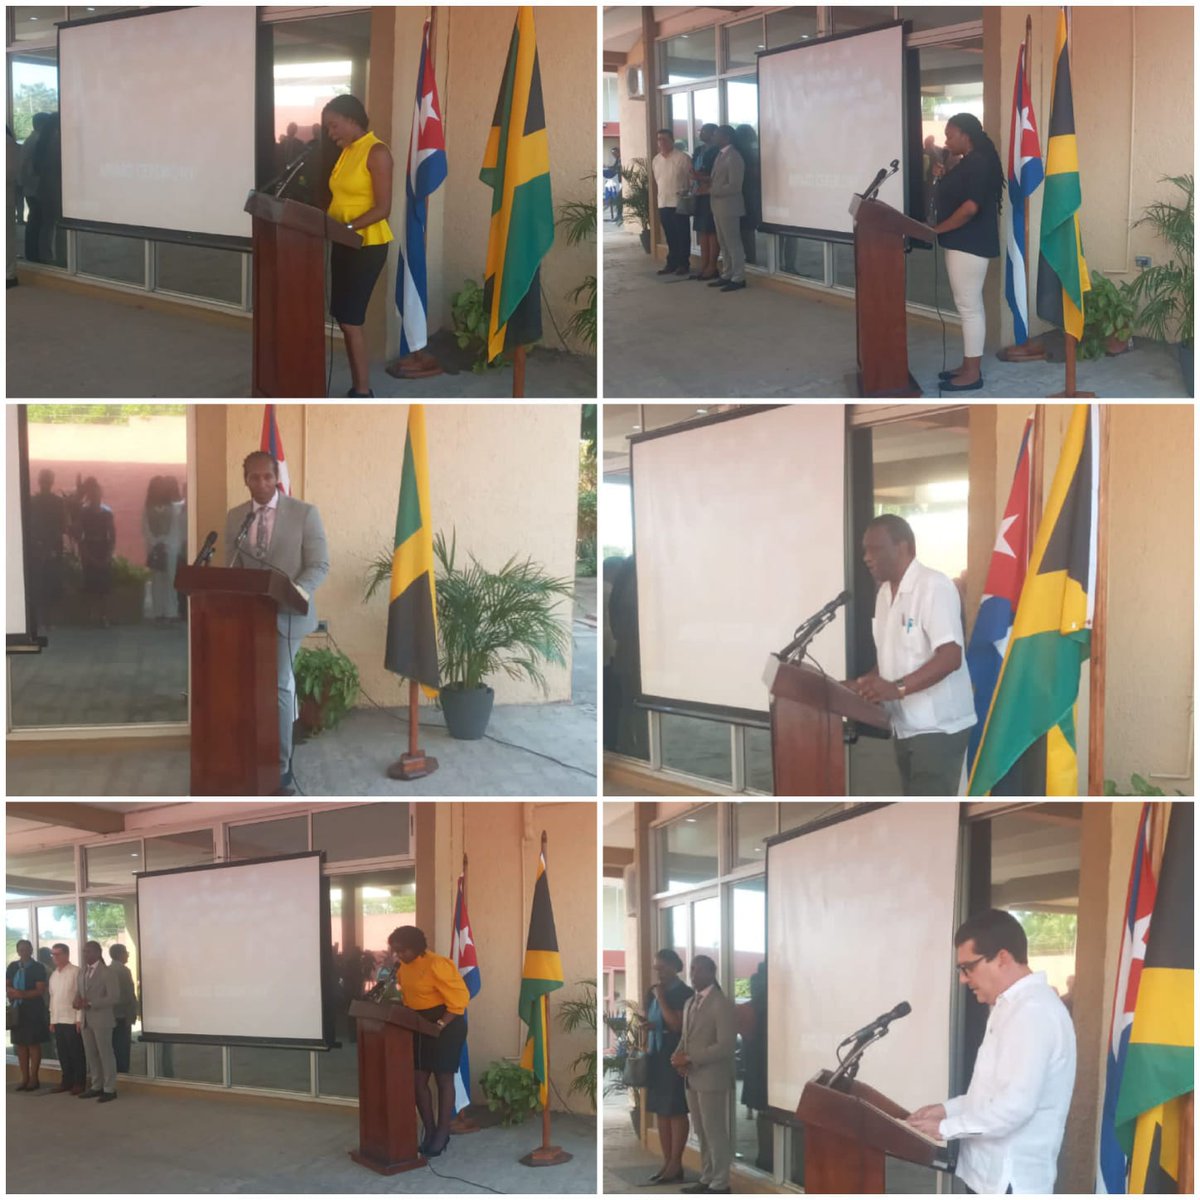 15 Jamaican students will begin their studies in Medicine, Nursing, Dentistry and Civil Engineering next September. The programme, initiated in the 1970s, is a symbol of the brotherhood between #Cuba and #Jamaica.